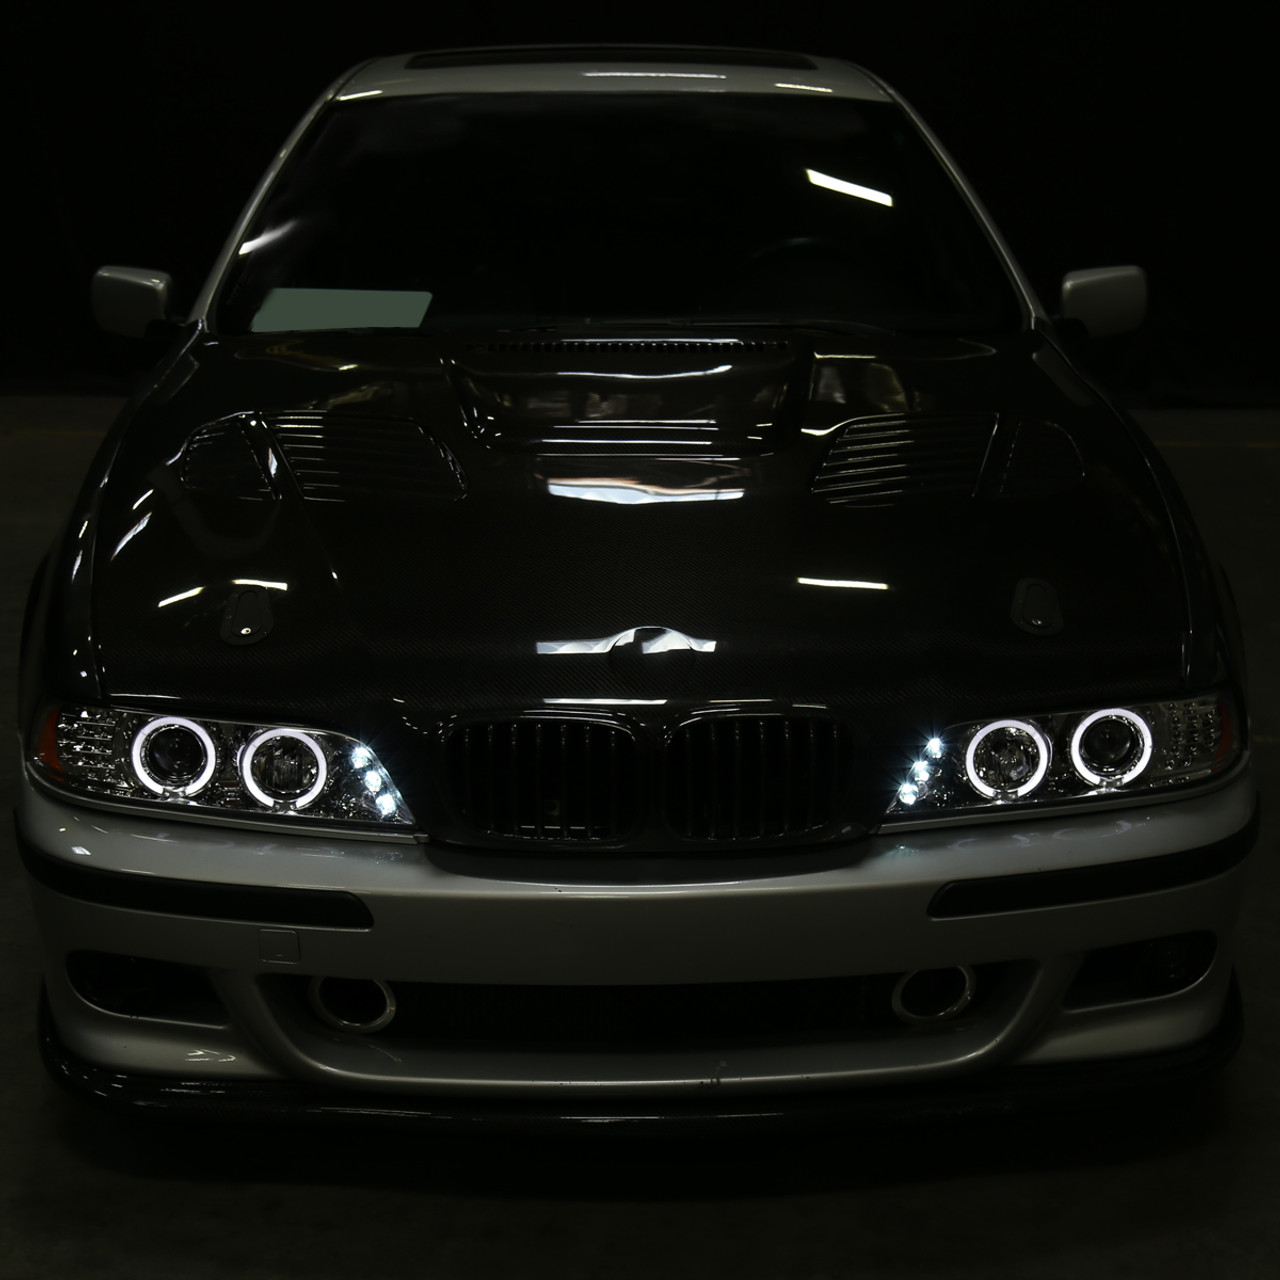 2001-2003 BMW E39 5 Series Dual Halo Projector Headlights w/ LED Turn Signal  Lights (Chrome Housing/Clear Lens) - Spec-D Tuning